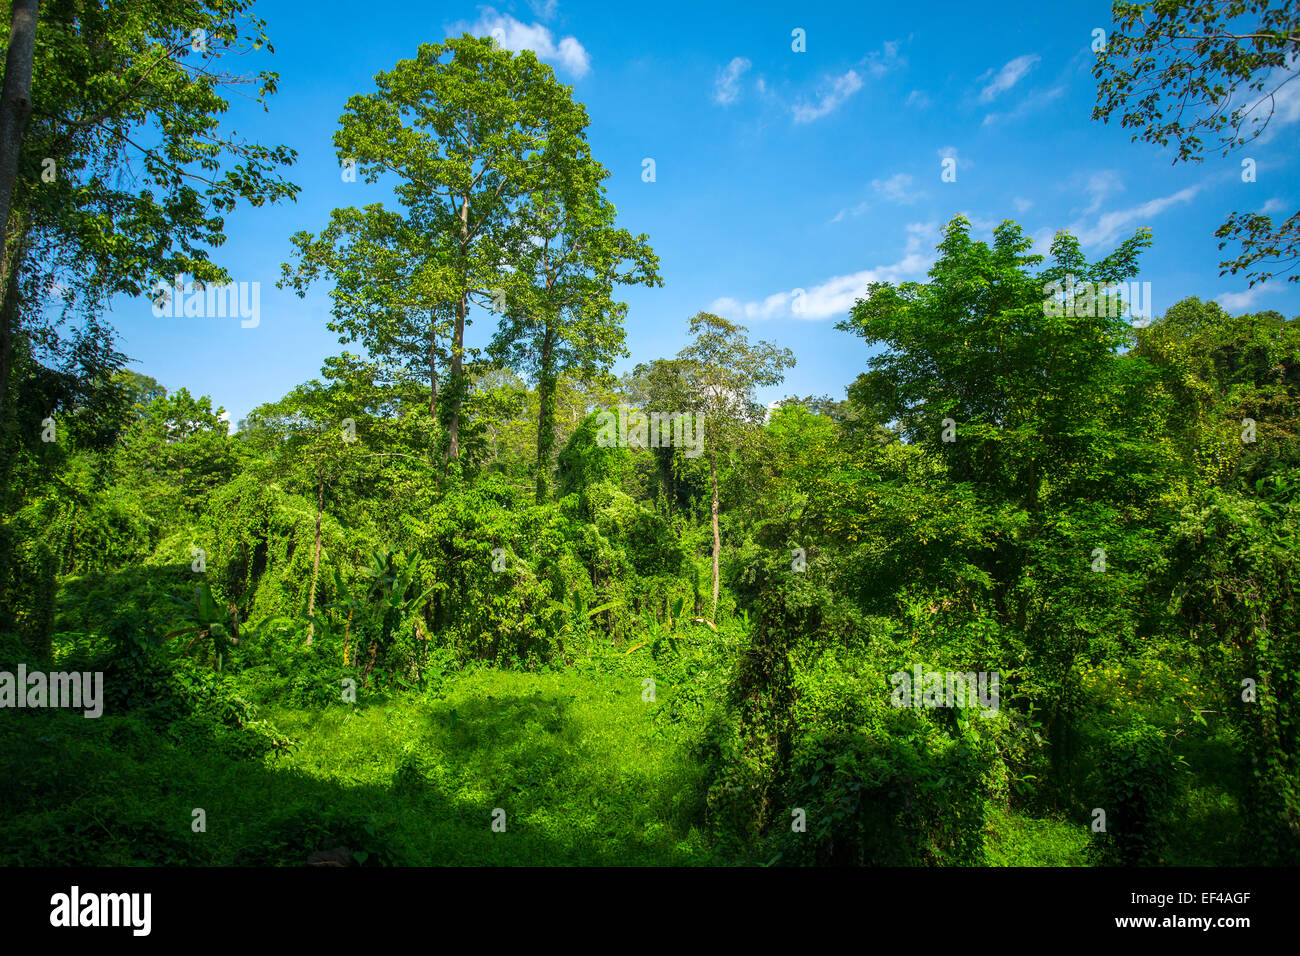 Lush green tropical forest Stock Photo